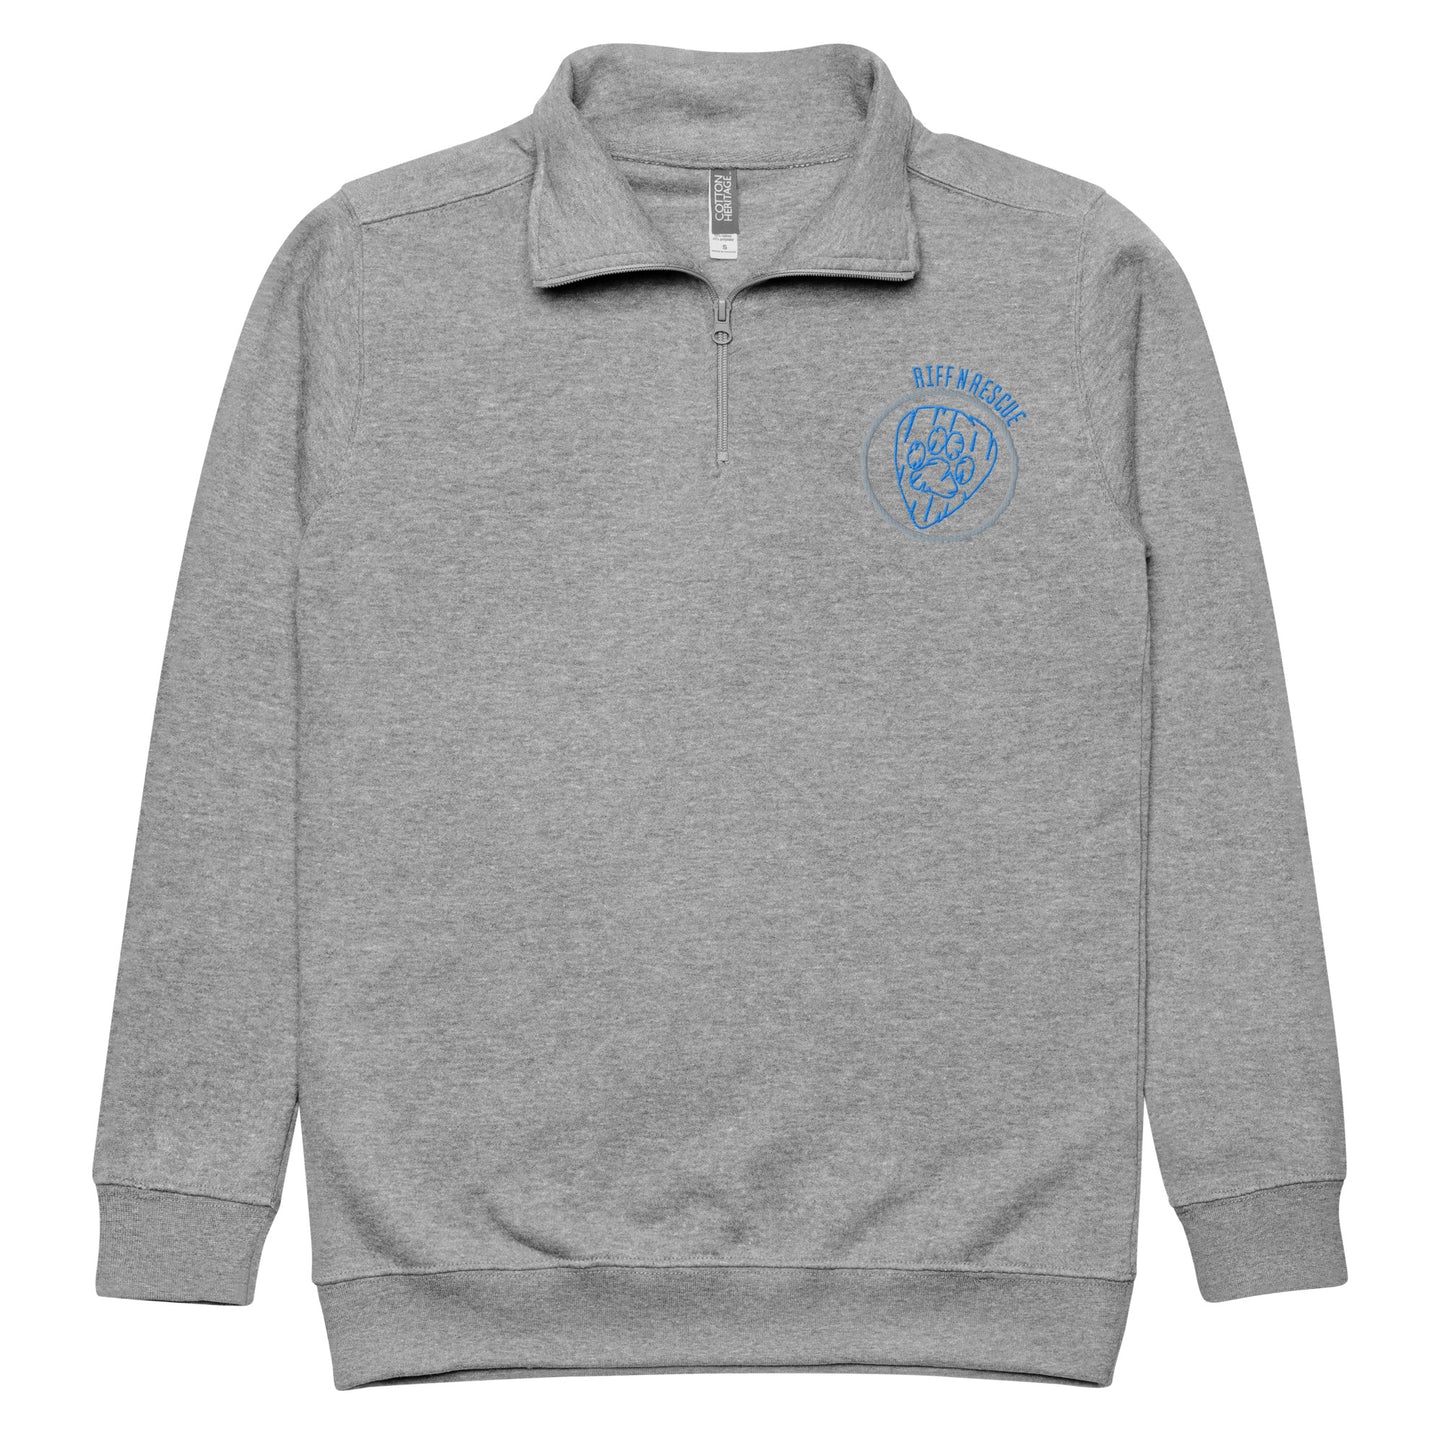 Bang Heads/Wag Tails Embroidered 1/4 Zip pullover (BLUE)